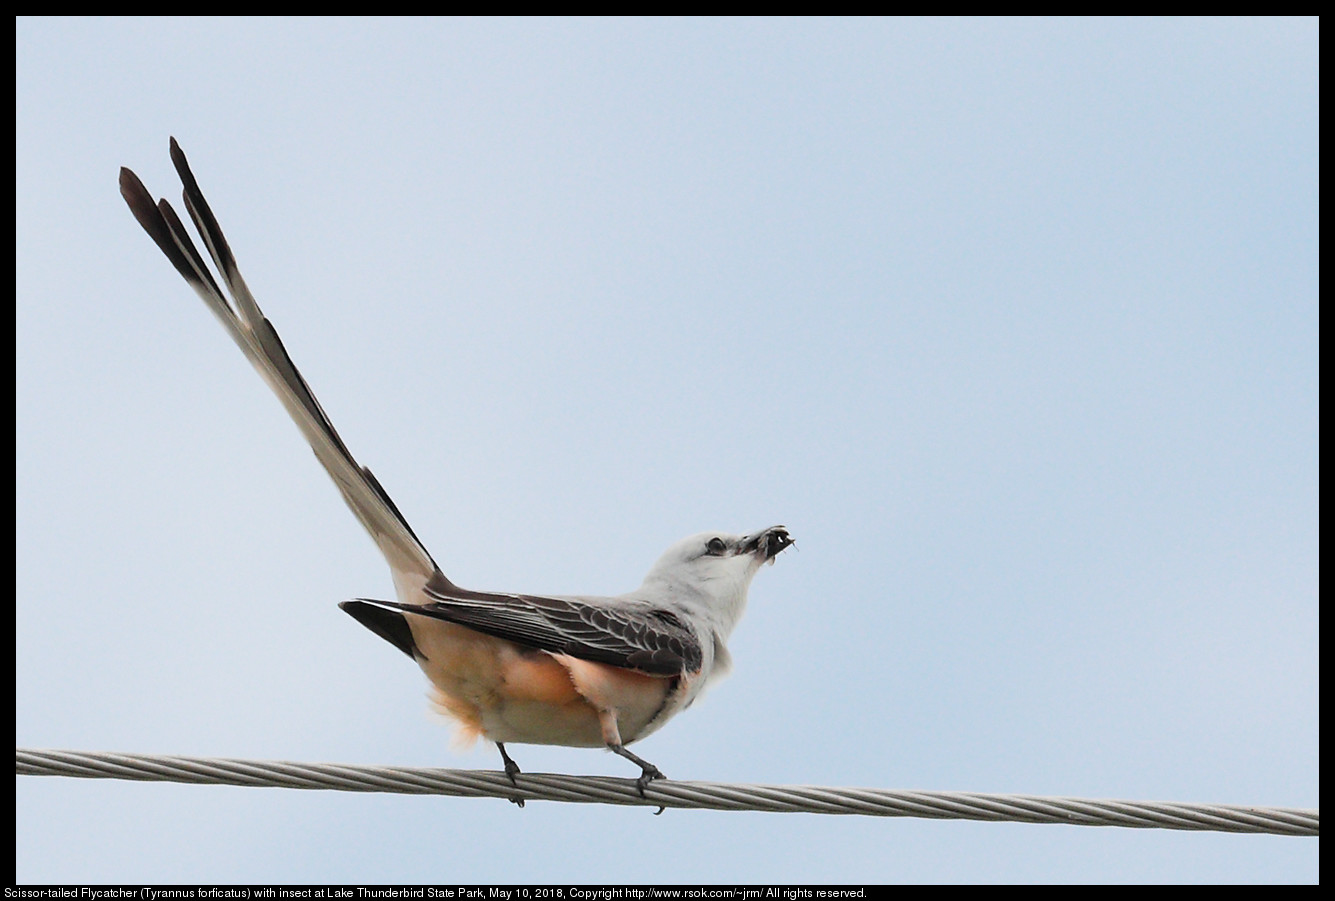 Scissor-tailed Flycatcher (Tyrannus forficatus) with insect at Lake Thunderbird State Park, May 10, 2018